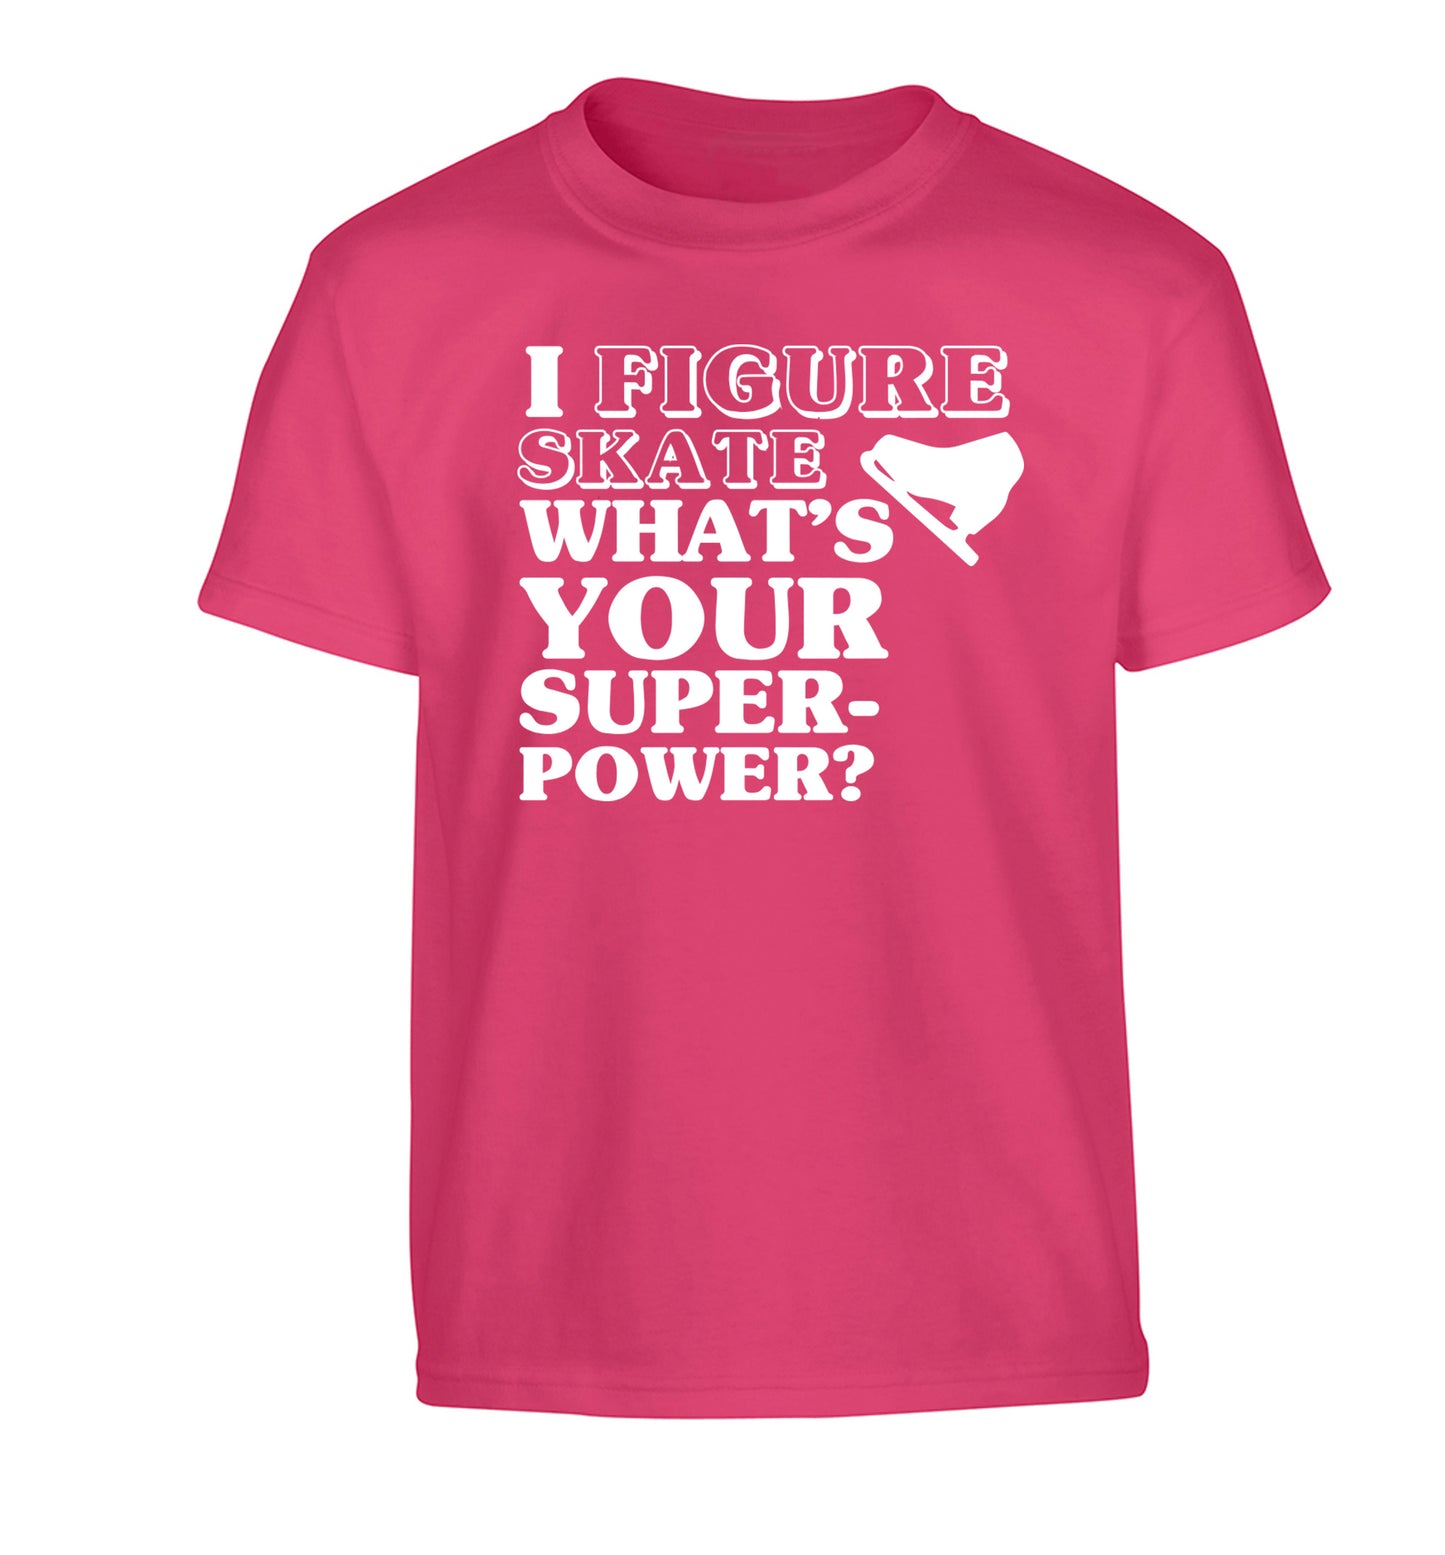 I figure skate what's your superpower? Children's pink Tshirt 12-14 Years